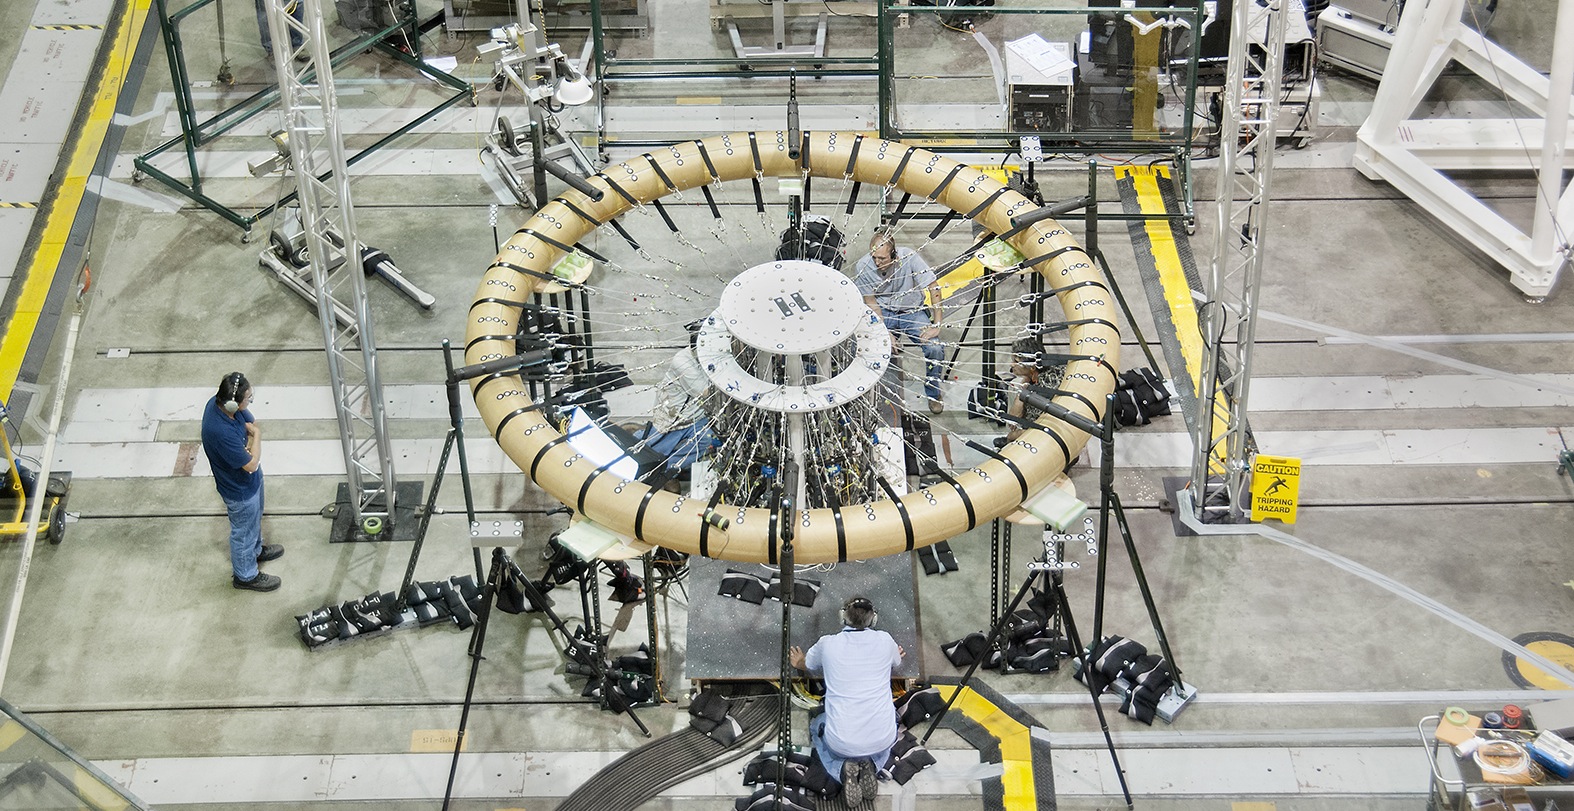 Researchers at NASA’s Armstrong Flight Research Center, Edwards, California, test a component of the Hypersonic Inflatable Aerodynamic Decelerator, or HIAD, in 2013 in the center’s Flight Loads Laboratory.